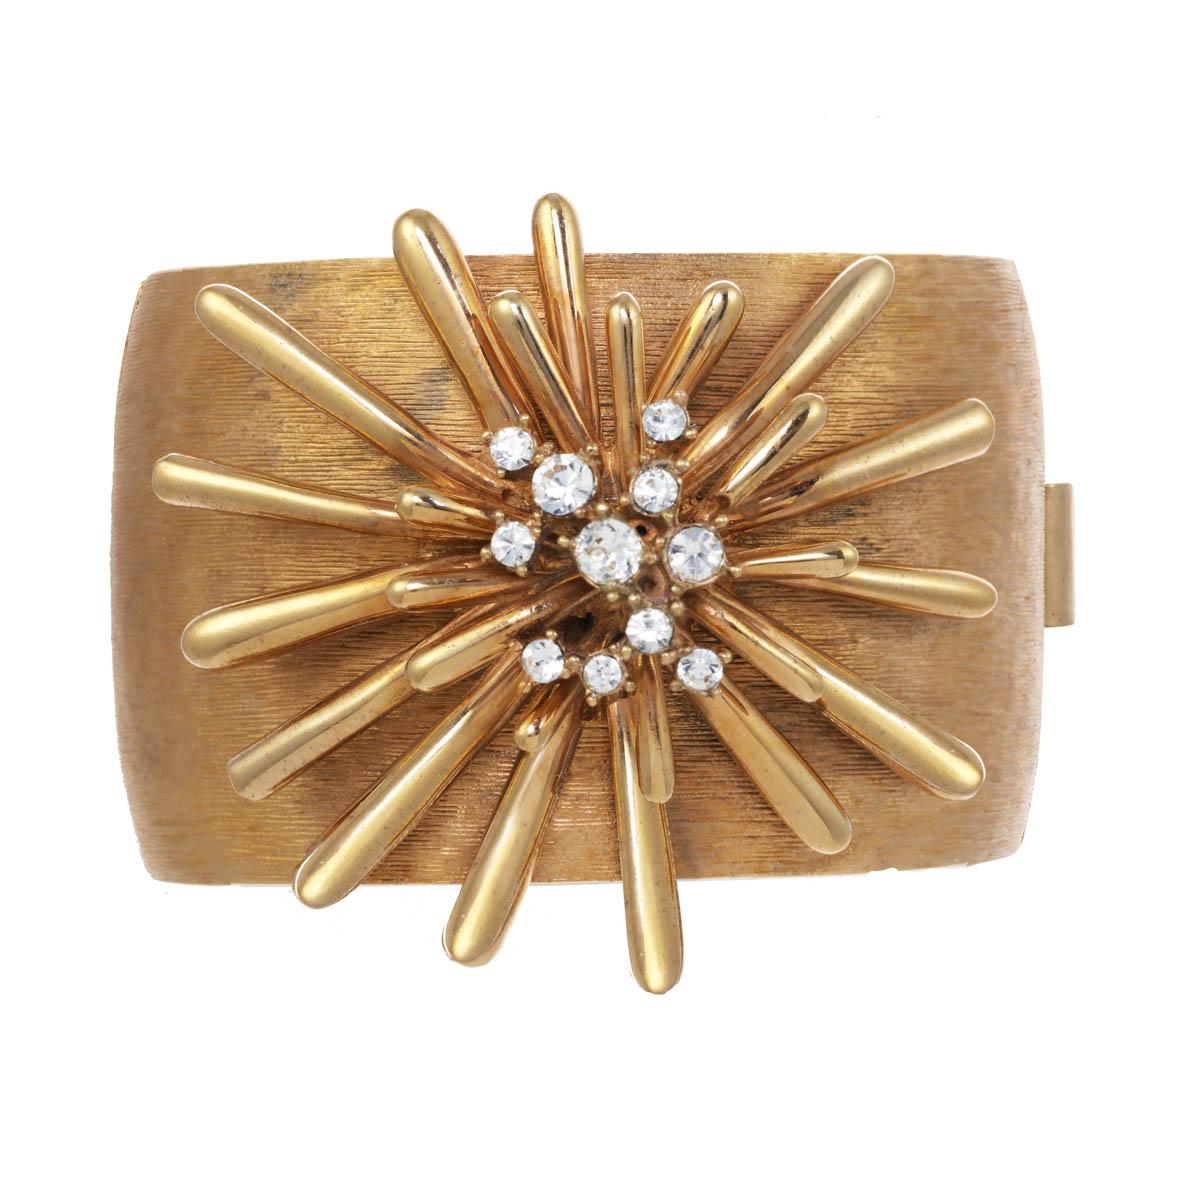 Bold and beautiful! We simply adore the sputnik features on this signature CINER cuff. Gorgeous crystal rhinestones add the perfect amount of sparkles to this textured gold cuff.

Materials 
Pewter
18K Gold Plating
Crystal Rhinestones
Box and Tongue